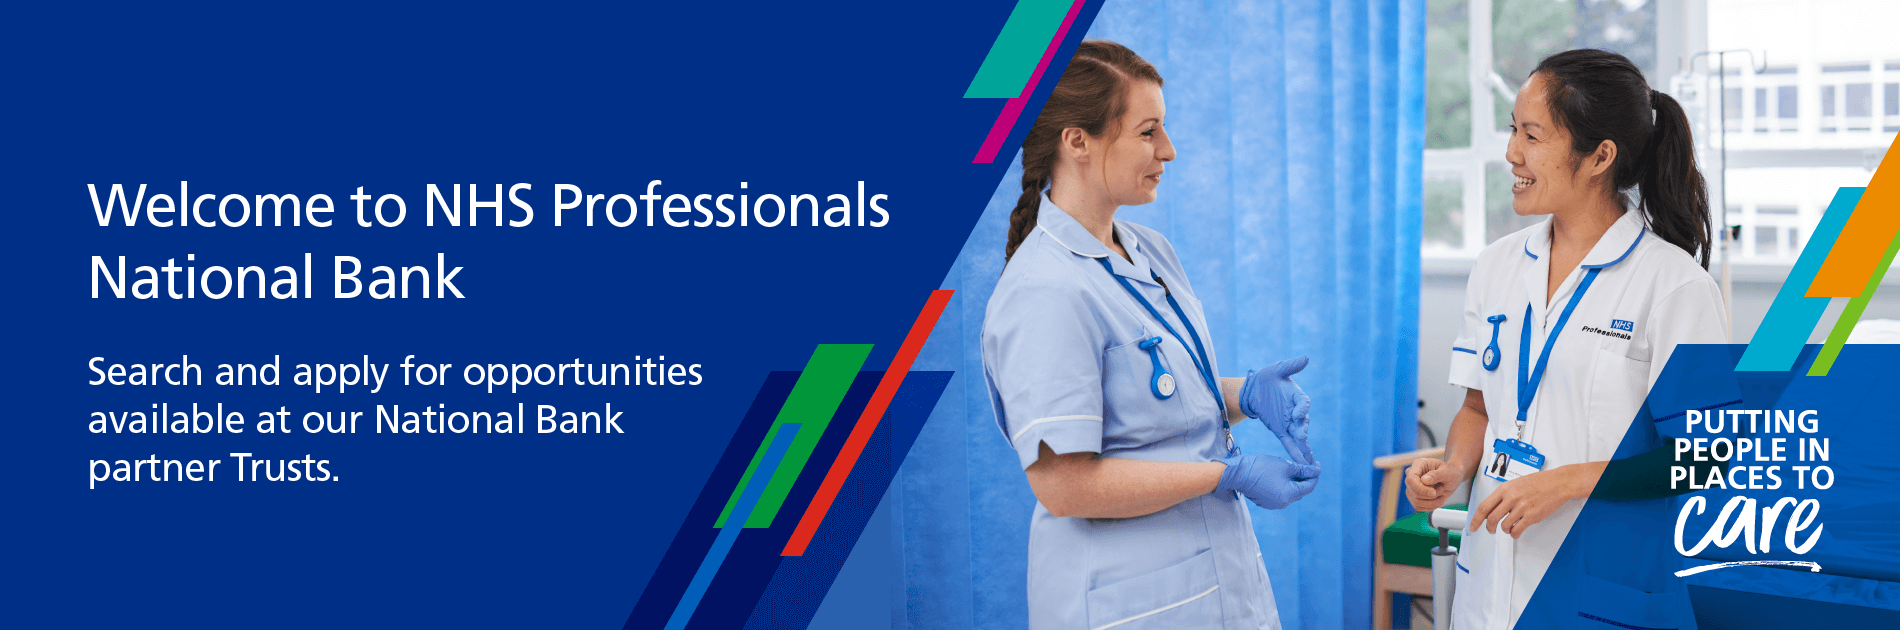 Welcome to NHS Professionals National Bank.
Search and apply for opportunities available at our National Bank partner Trusts.